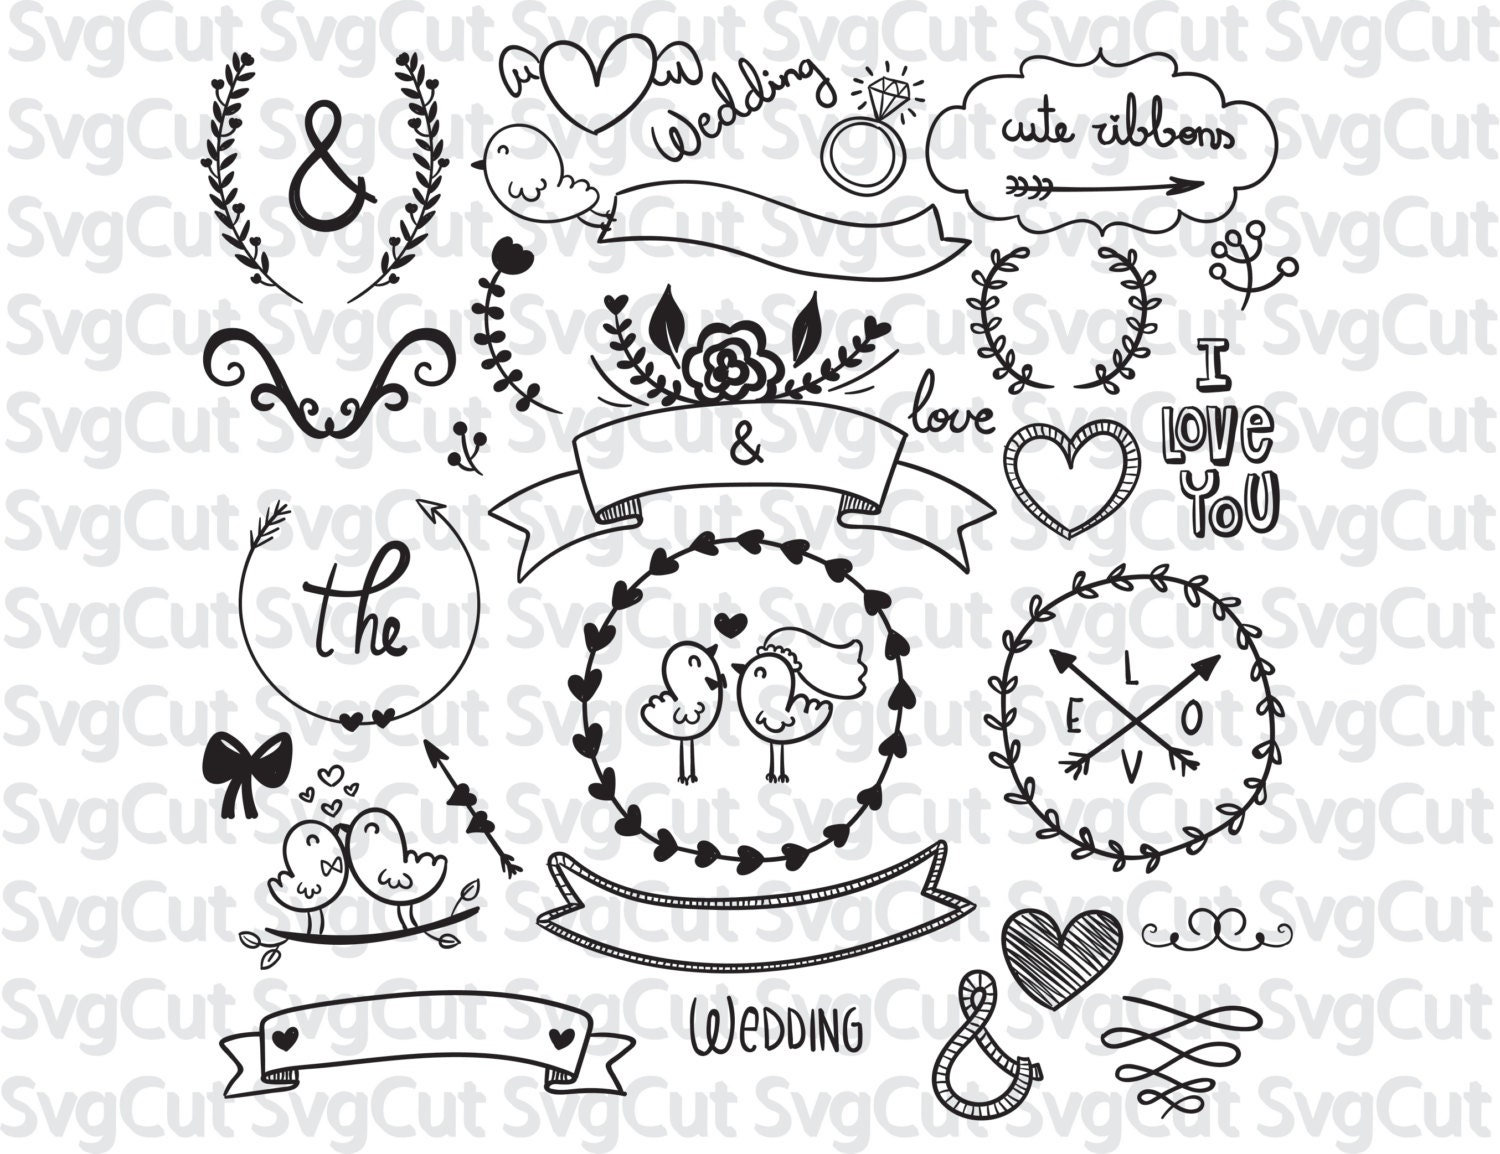  Wedding  clipart Marriage  SVG  Cutting files for wedding 